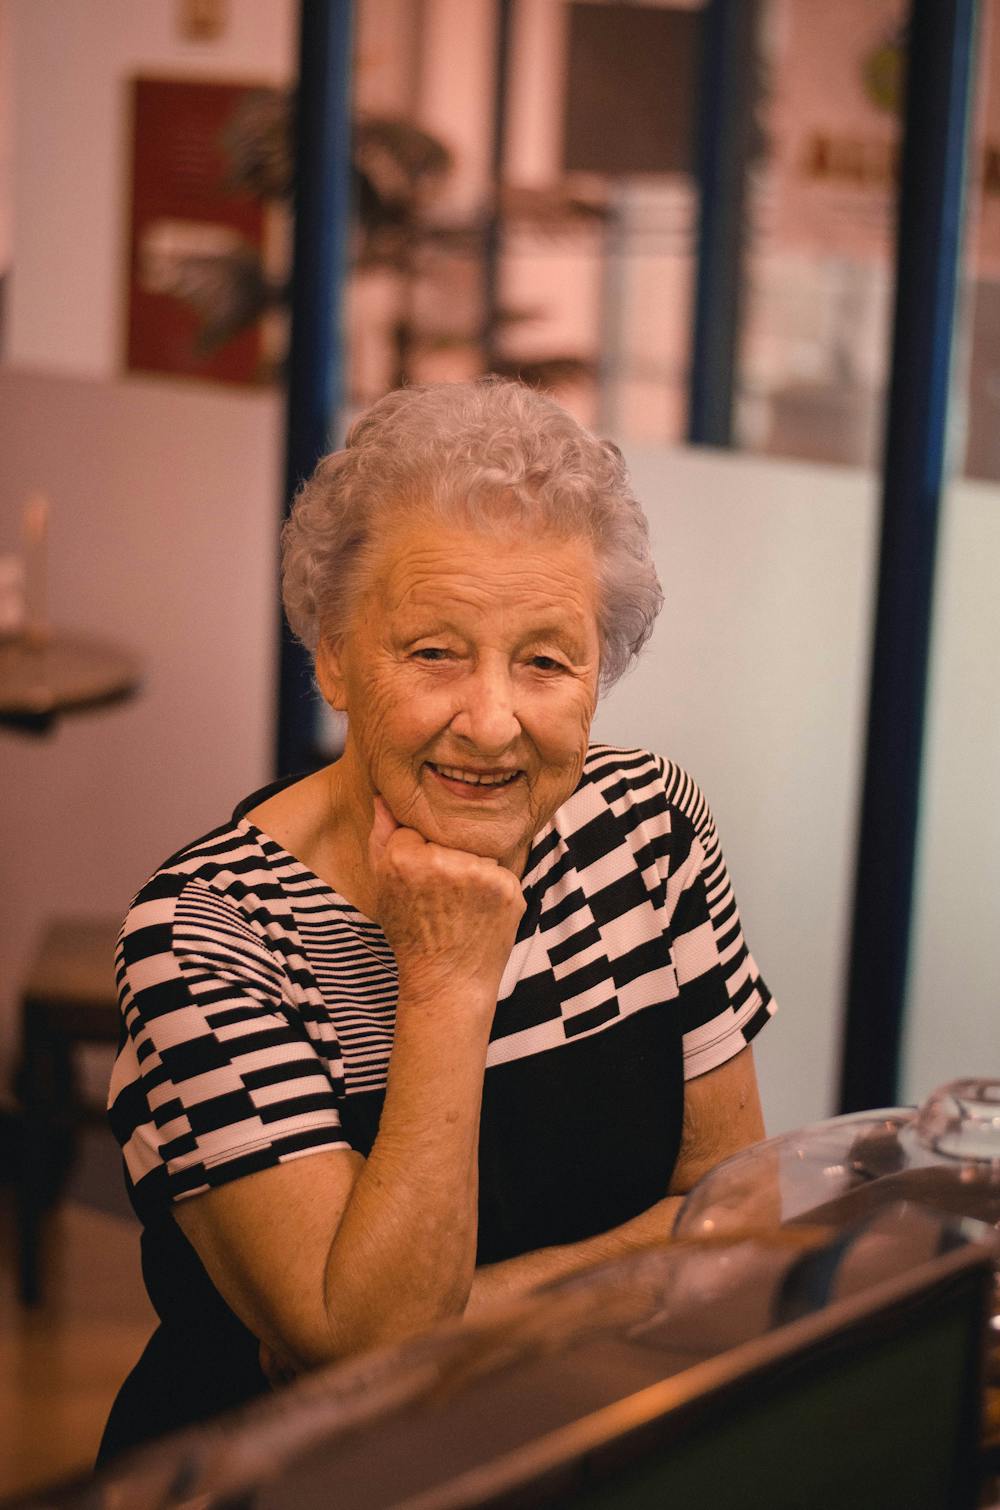 An old woman smiling | Photo: Pexels